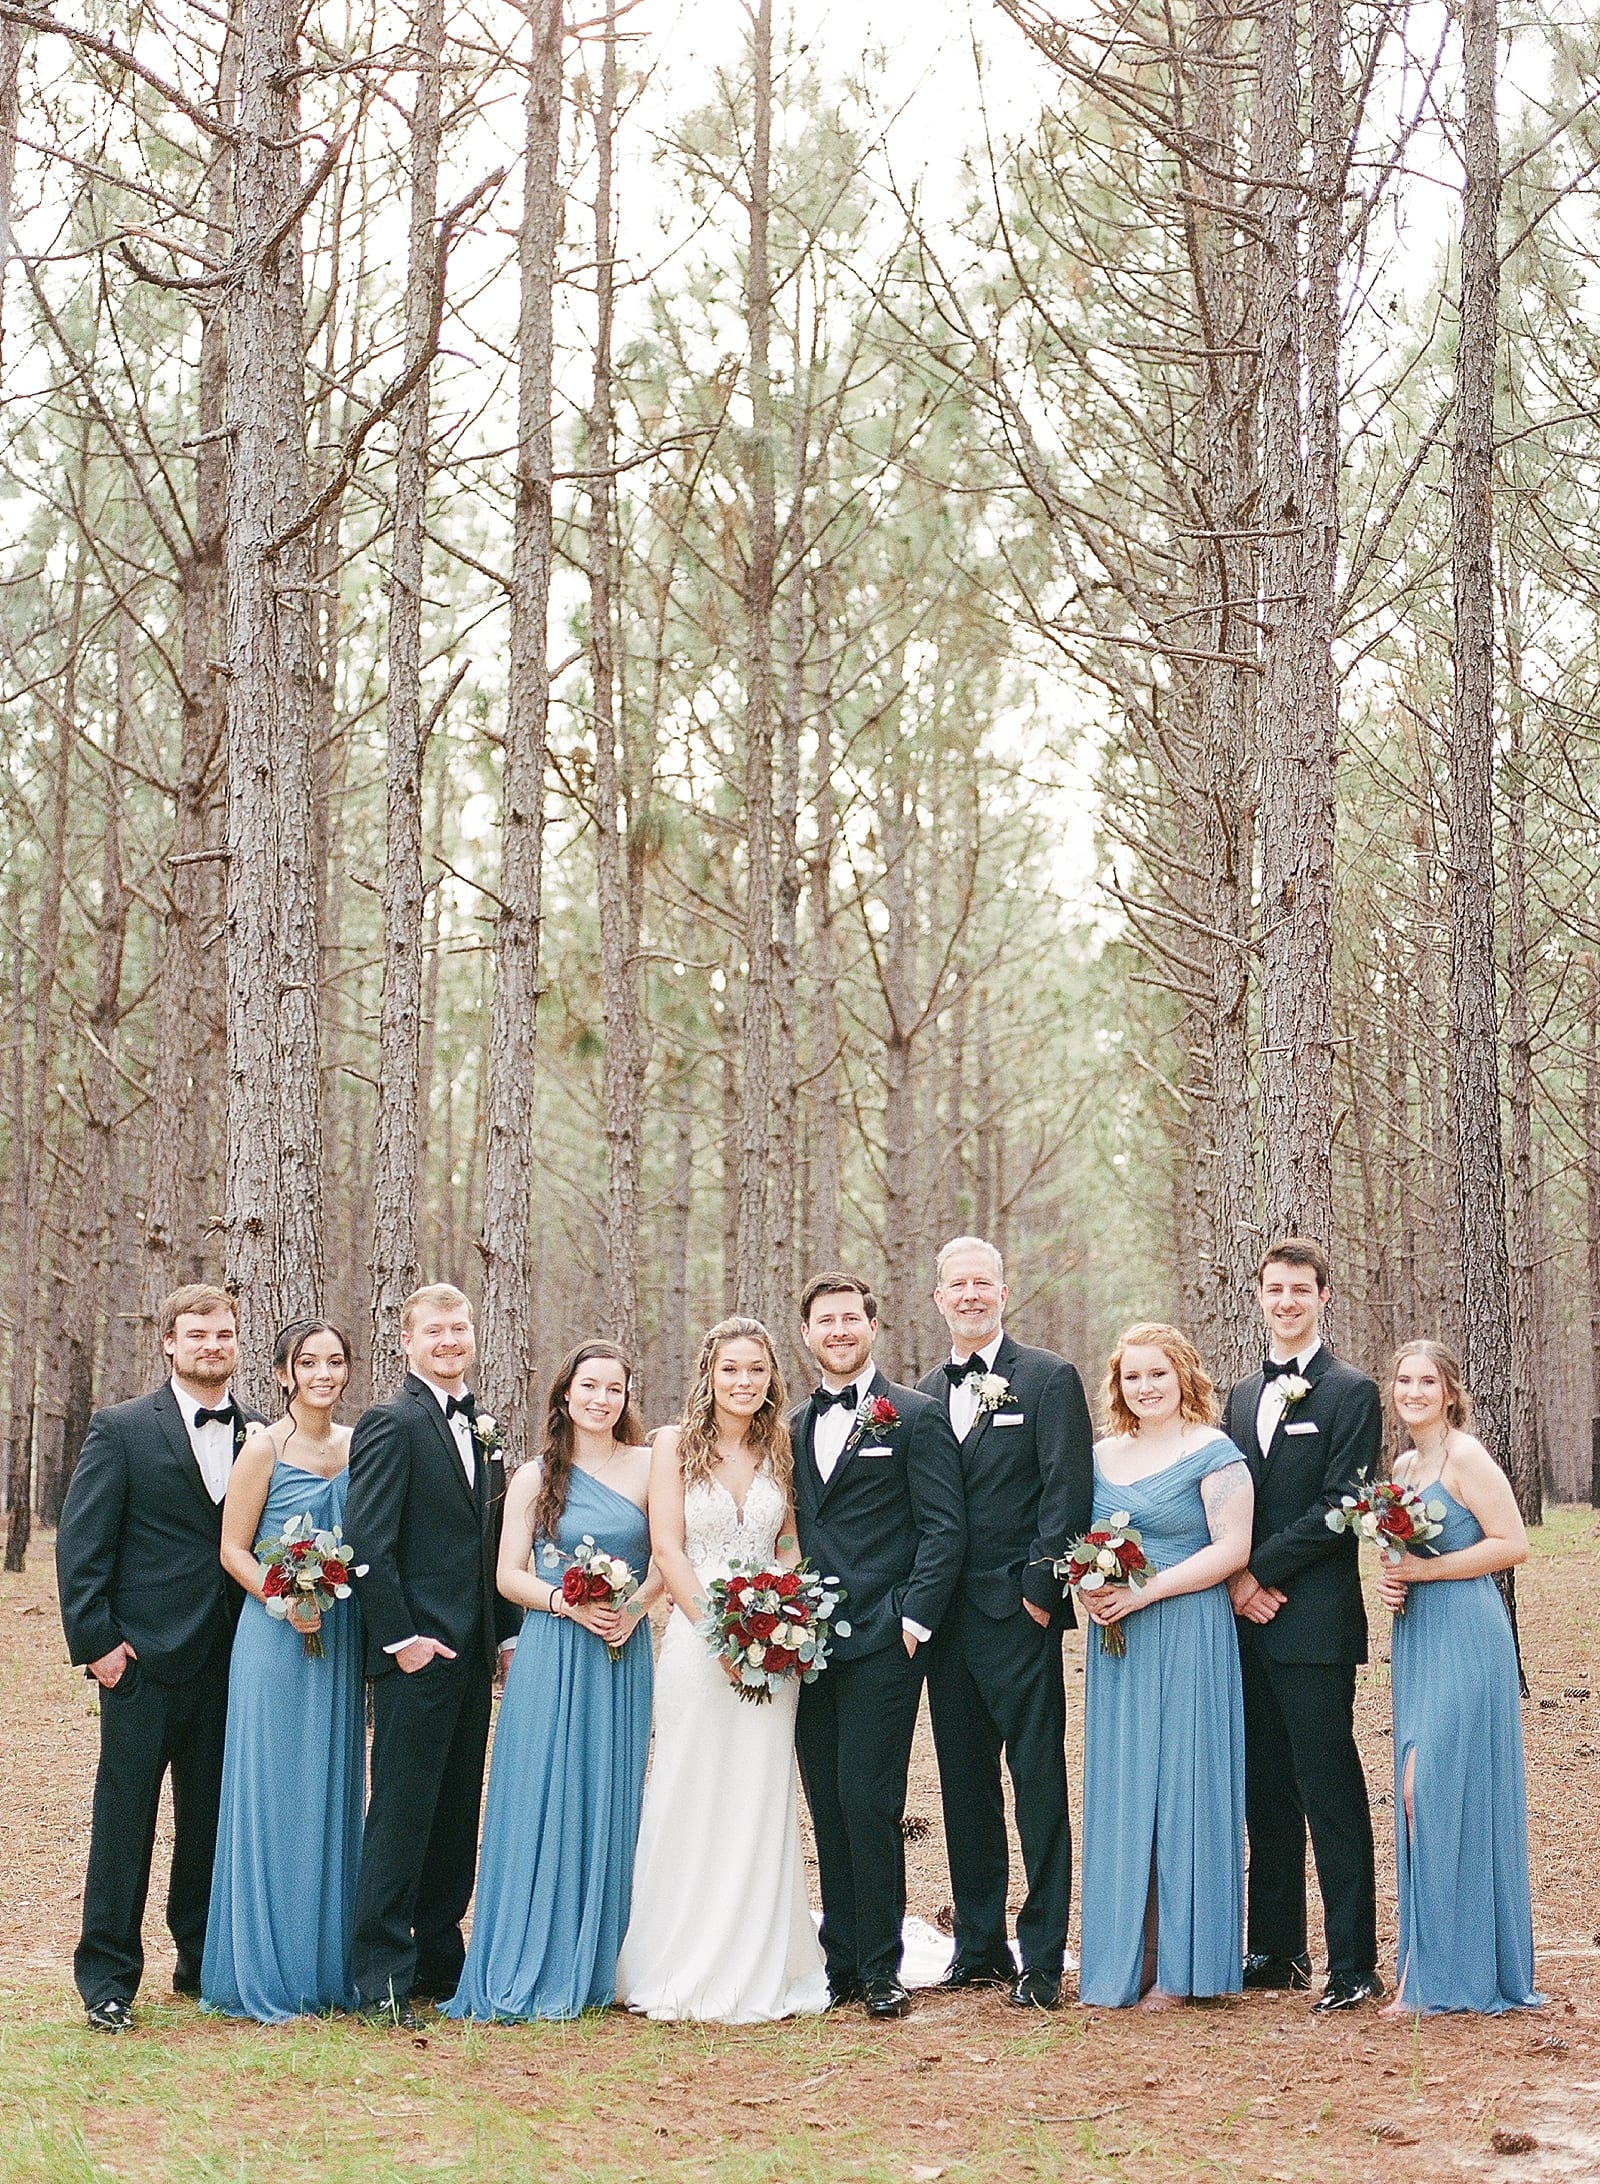 Bride and Groom with Bridal Party in Pine Trees Photo